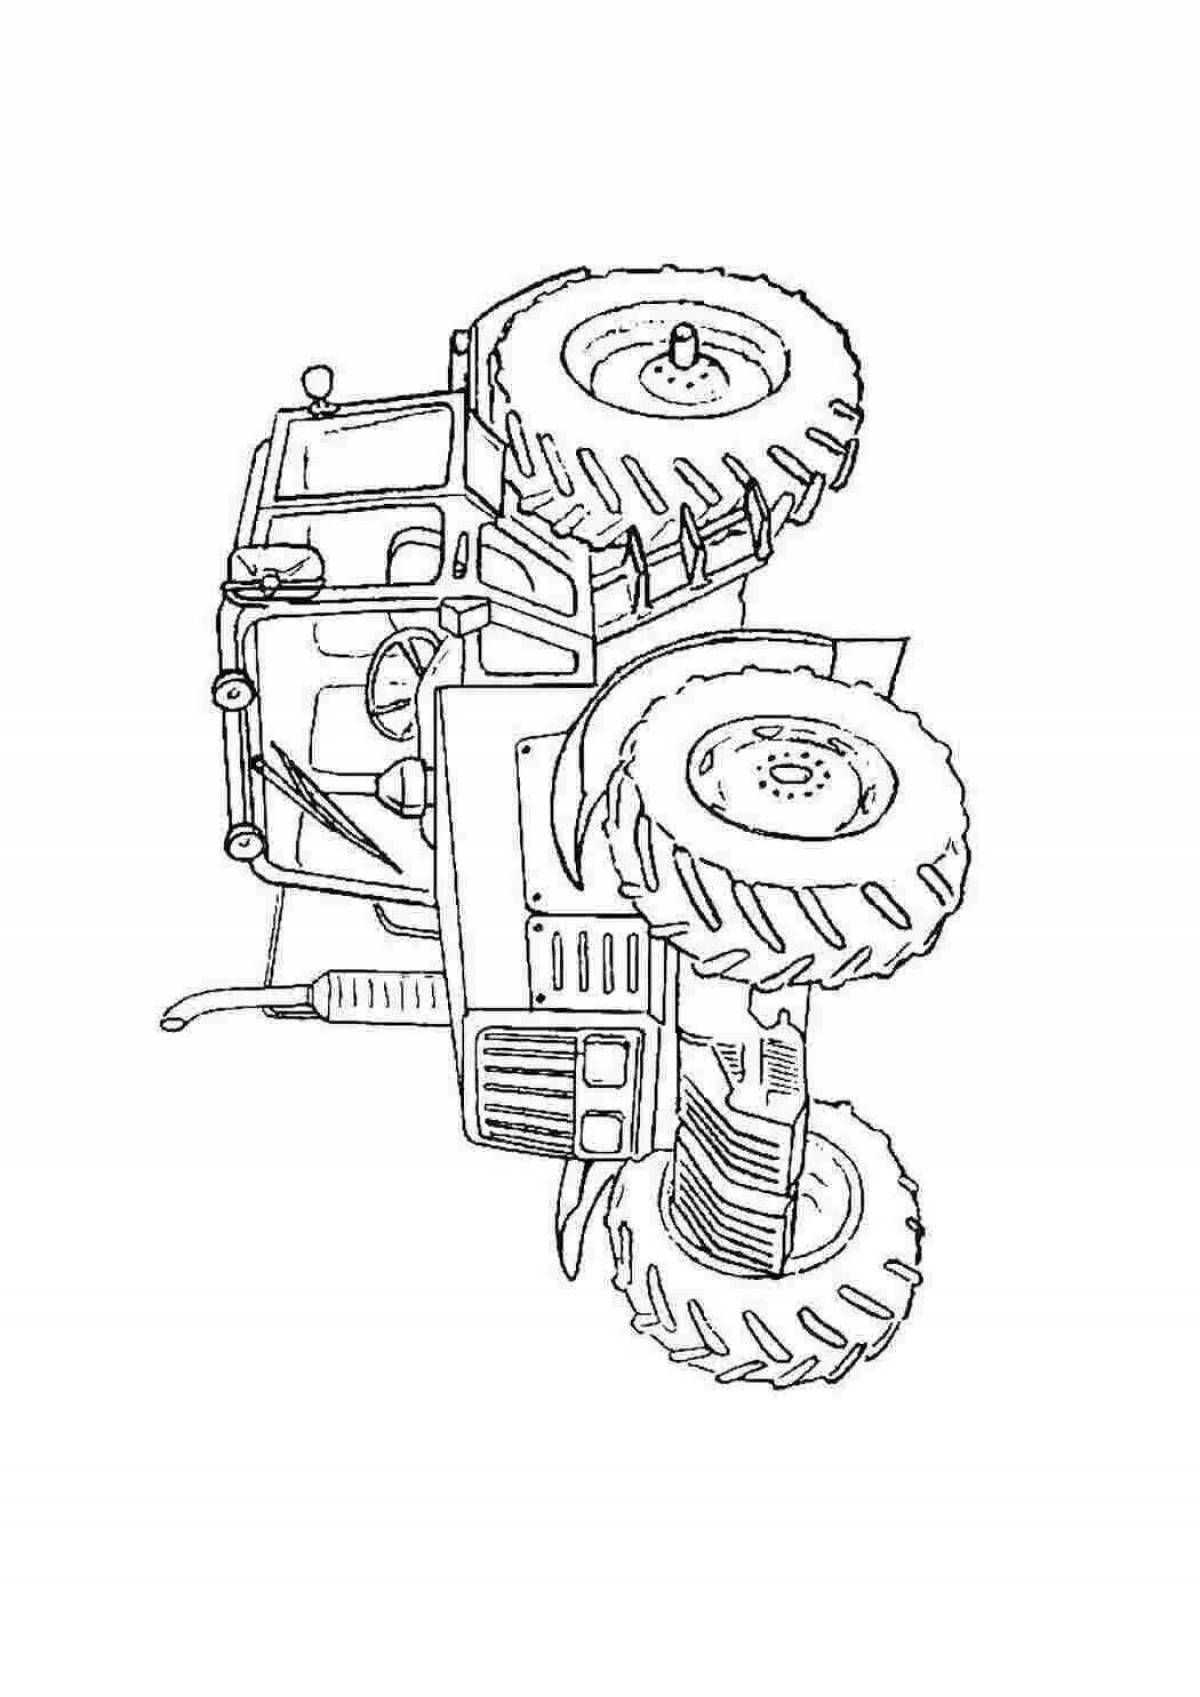 Coloring book playful tractor mtz 82